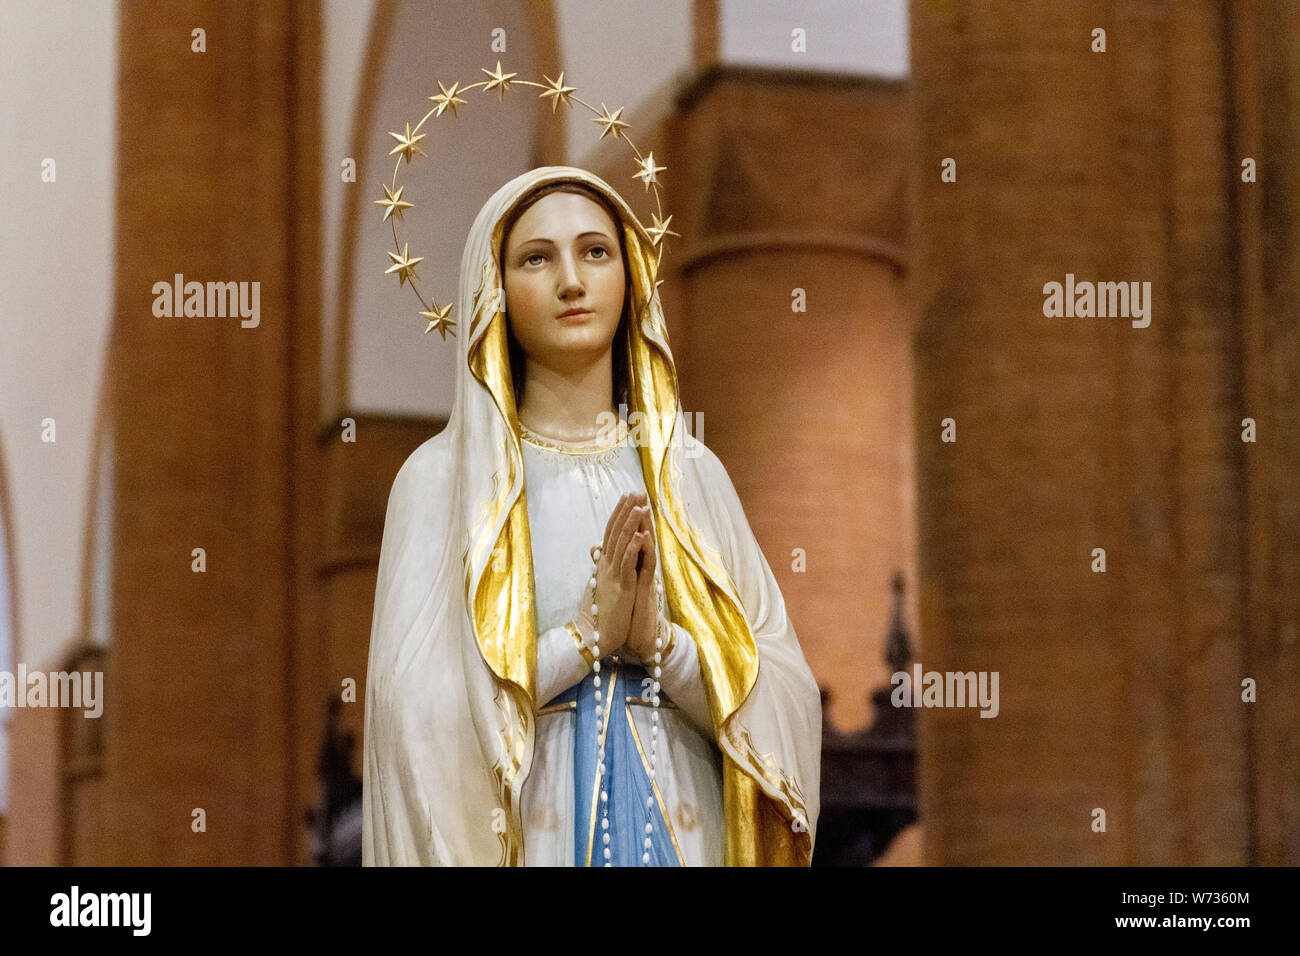 The statue of Our Lady of Lourdes in the 'Santa Maria del Carmine' church (Holy Mary of Carmel) in Pavia. Stock Photo